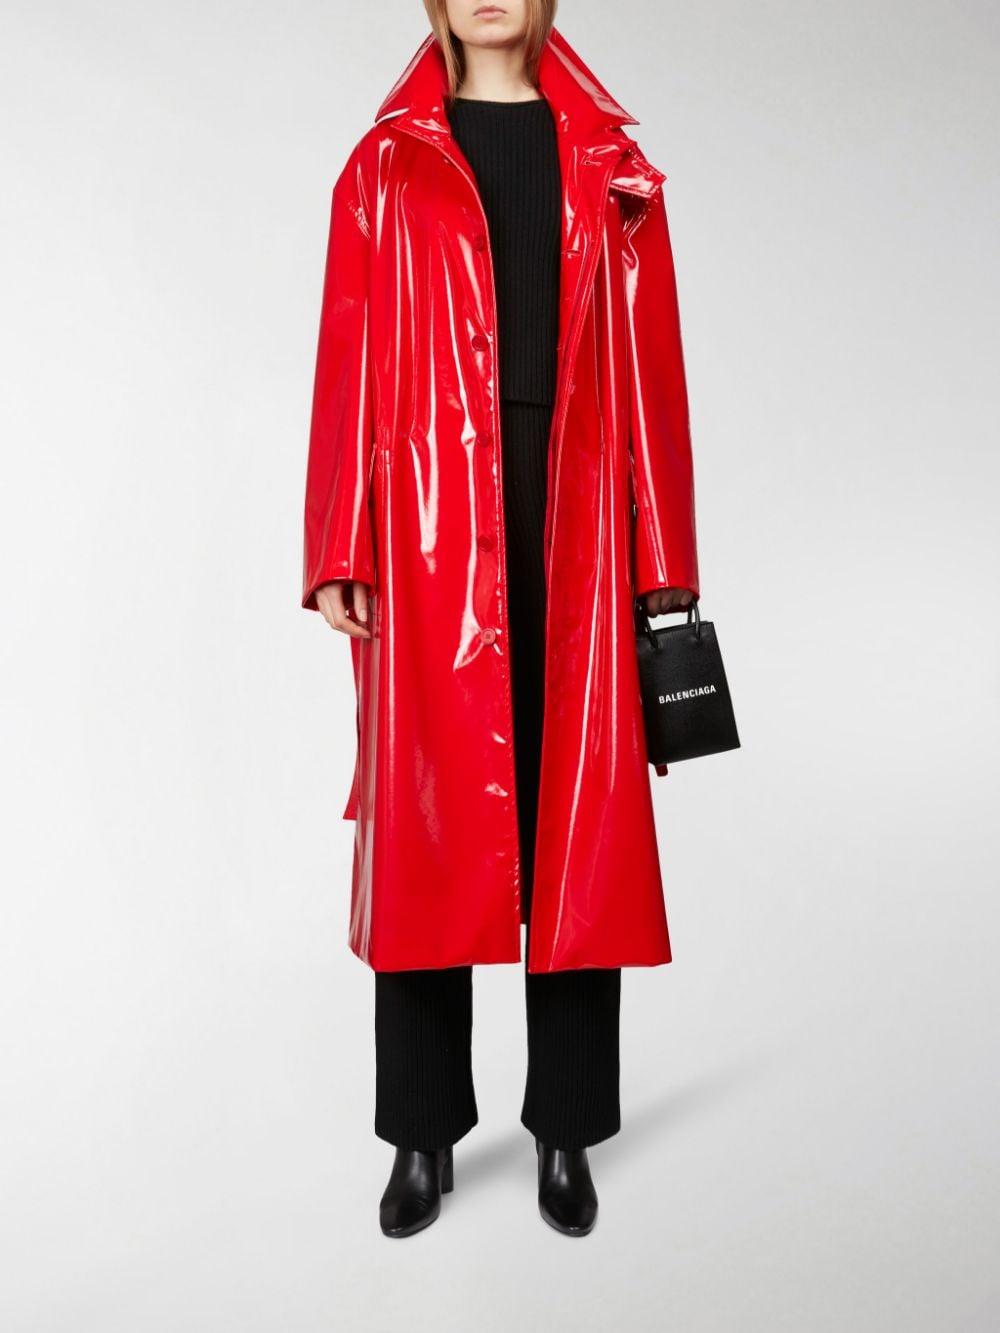 Balenciaga Patent Leather Trench Coat in Red | Lyst